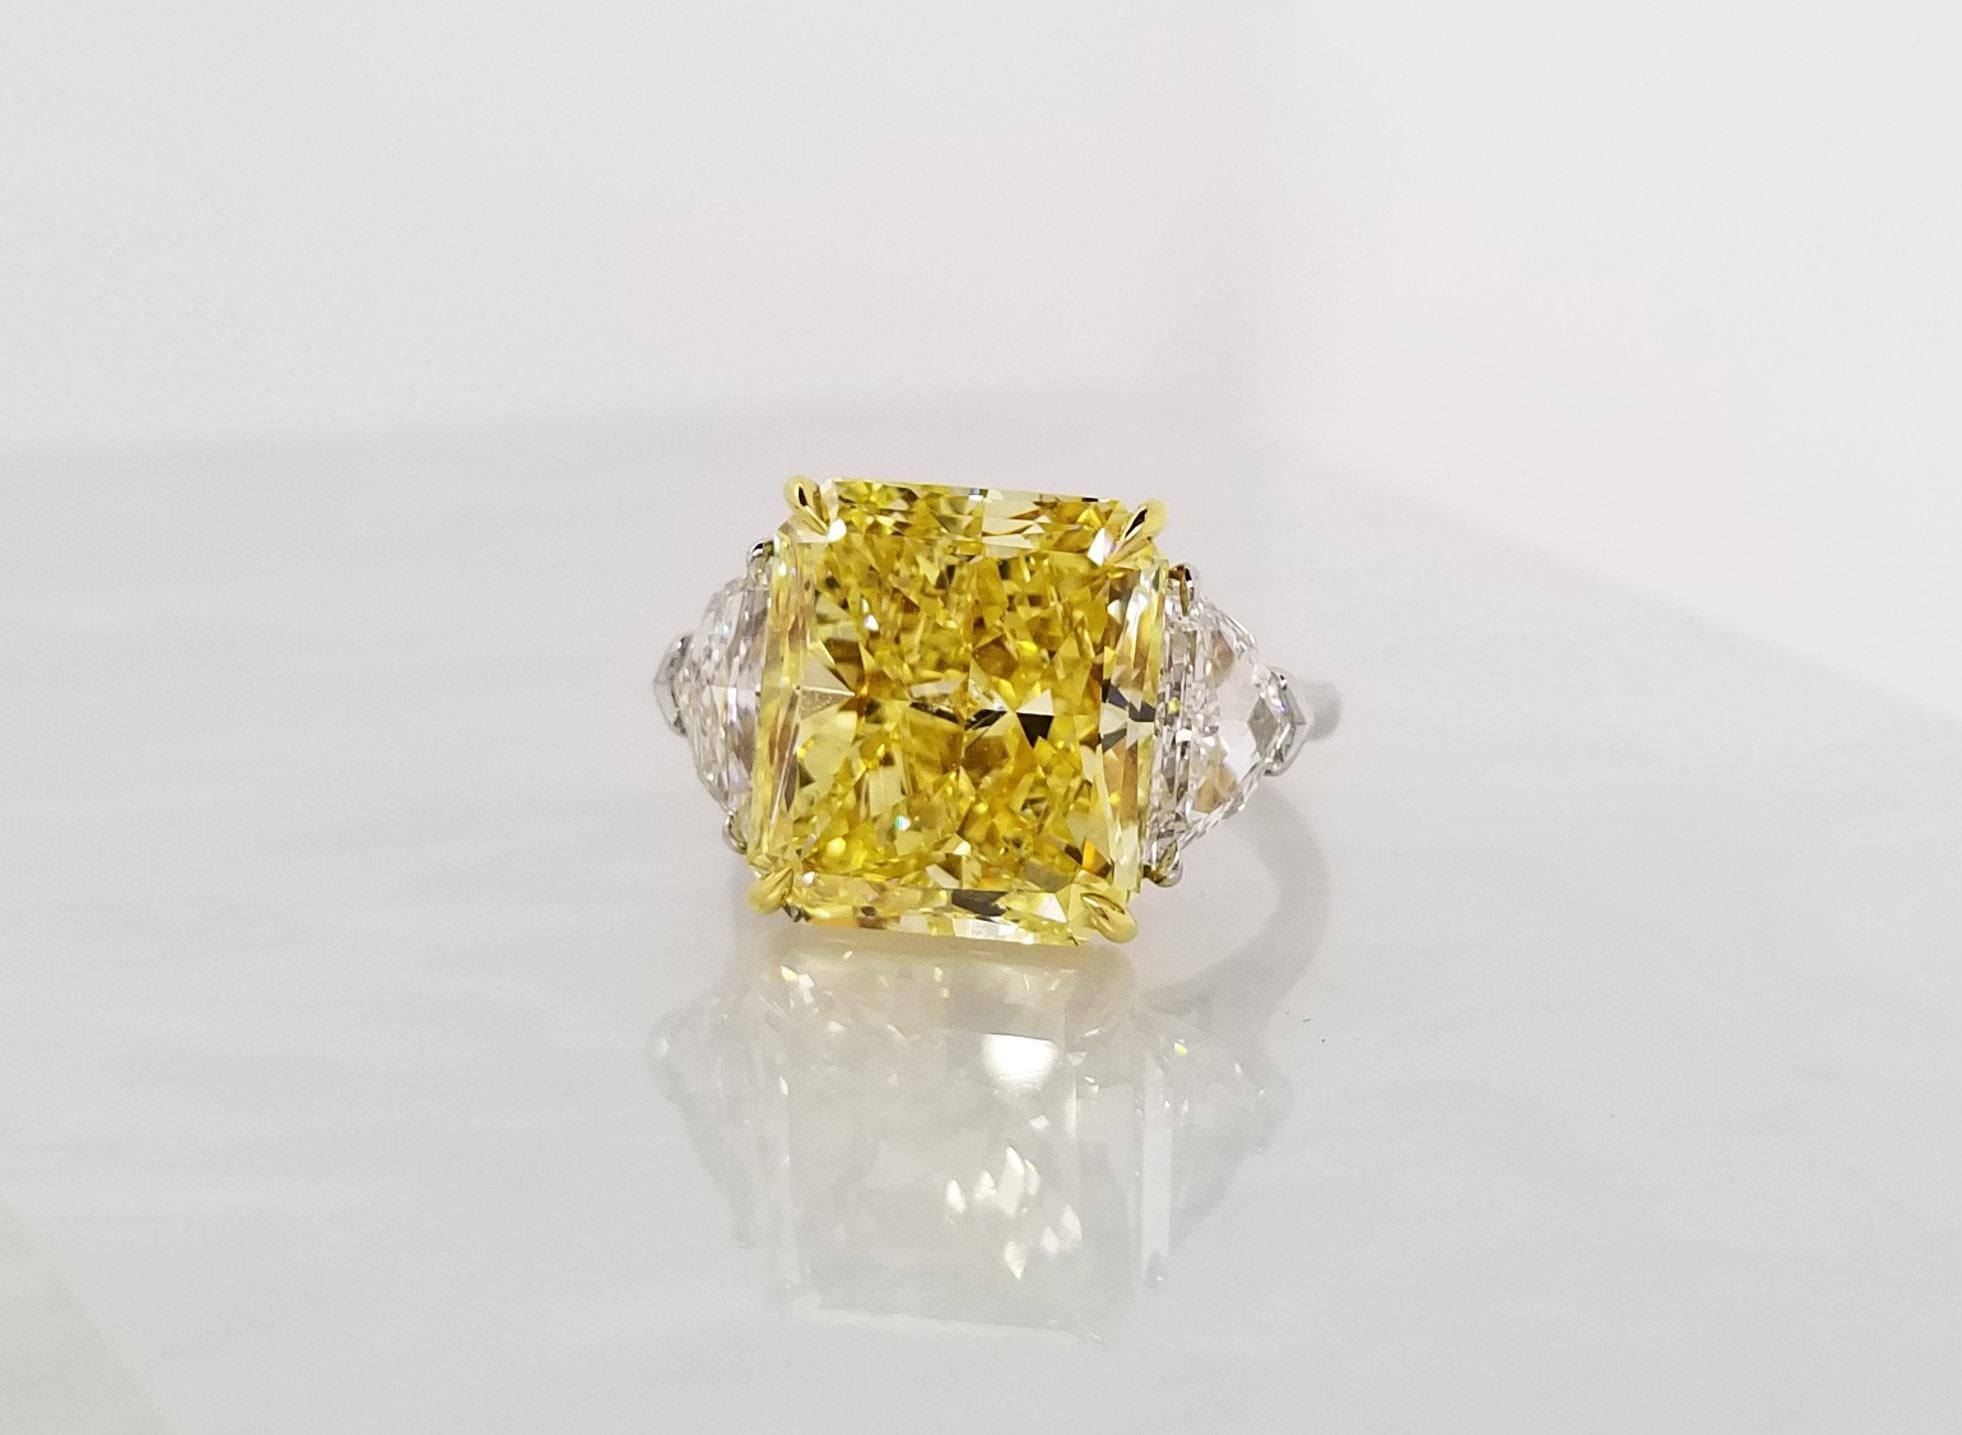 This Beautiful Classic Ring From Scarselli features a 10 carat Fancy Vivid Yellow Radiant Cut Diamond with GIA certificate 2165563315 (See certificate picture for detailed stone information). The center diamond is guarded by 2 half-moon white